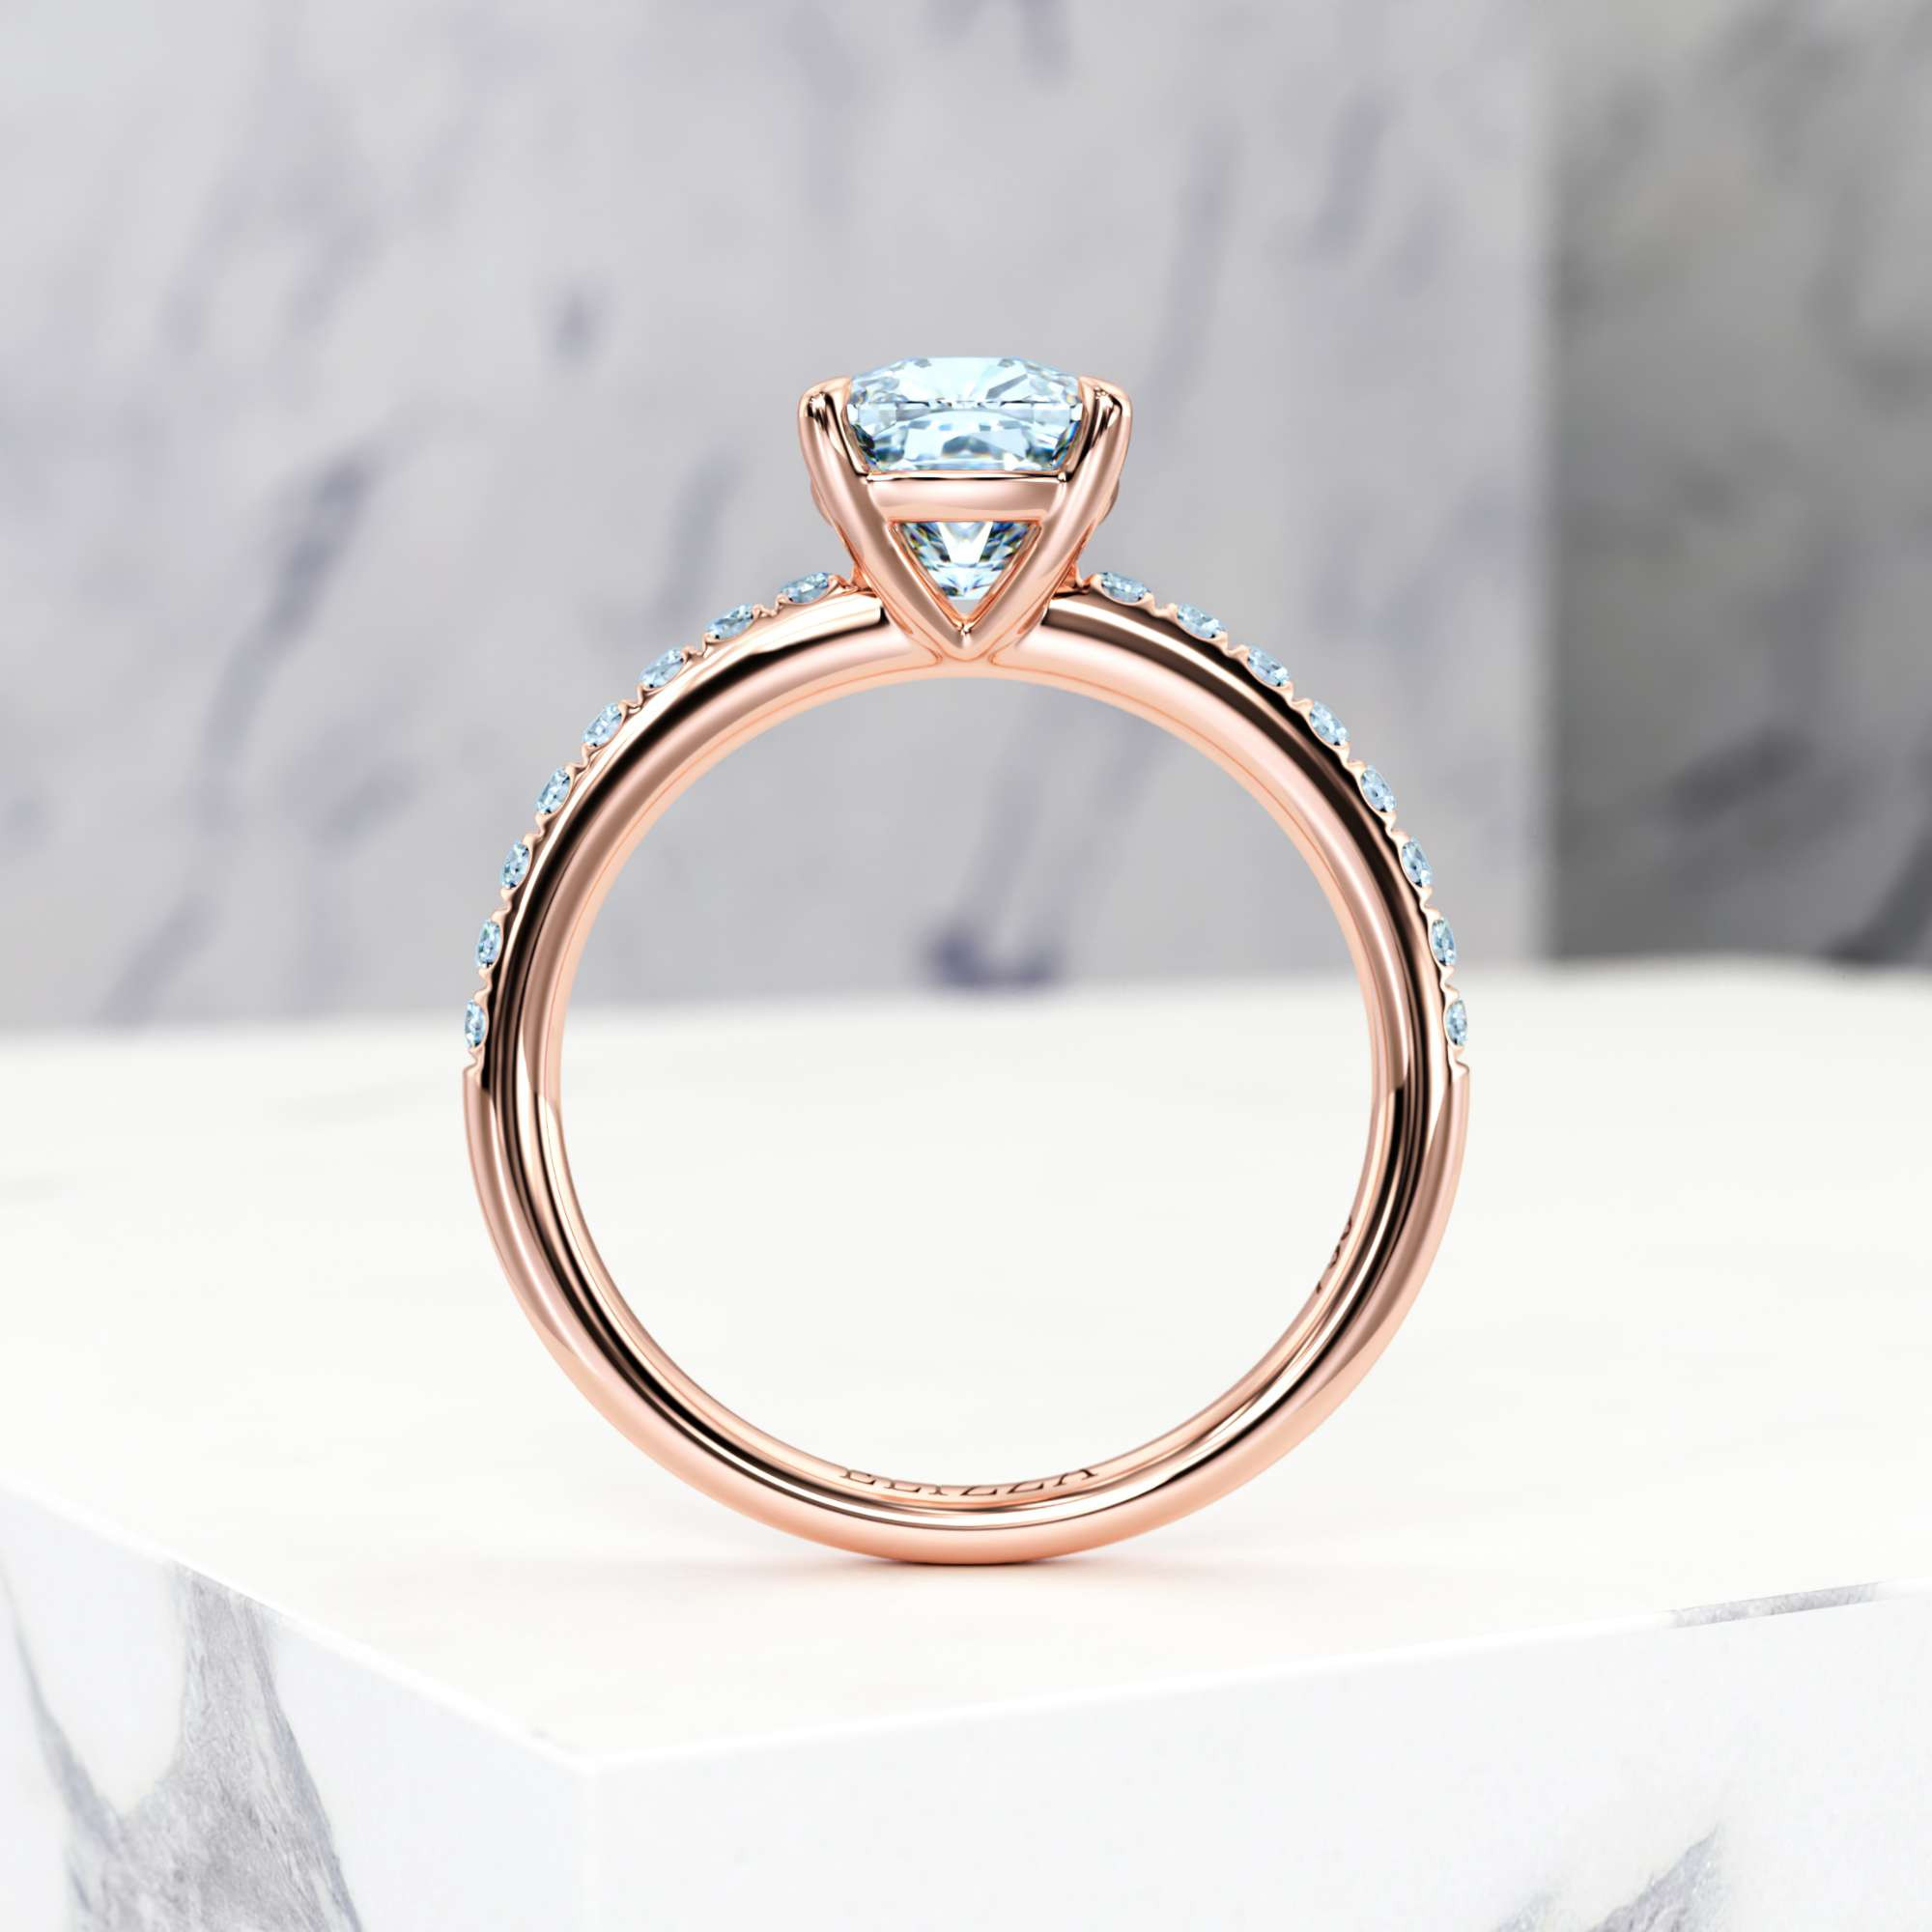 Verlobungsring Evelyn Square Cushion | Square cushion | 14K Roségold | Natural | GIA Certified | 0.30ct SI1 H 4